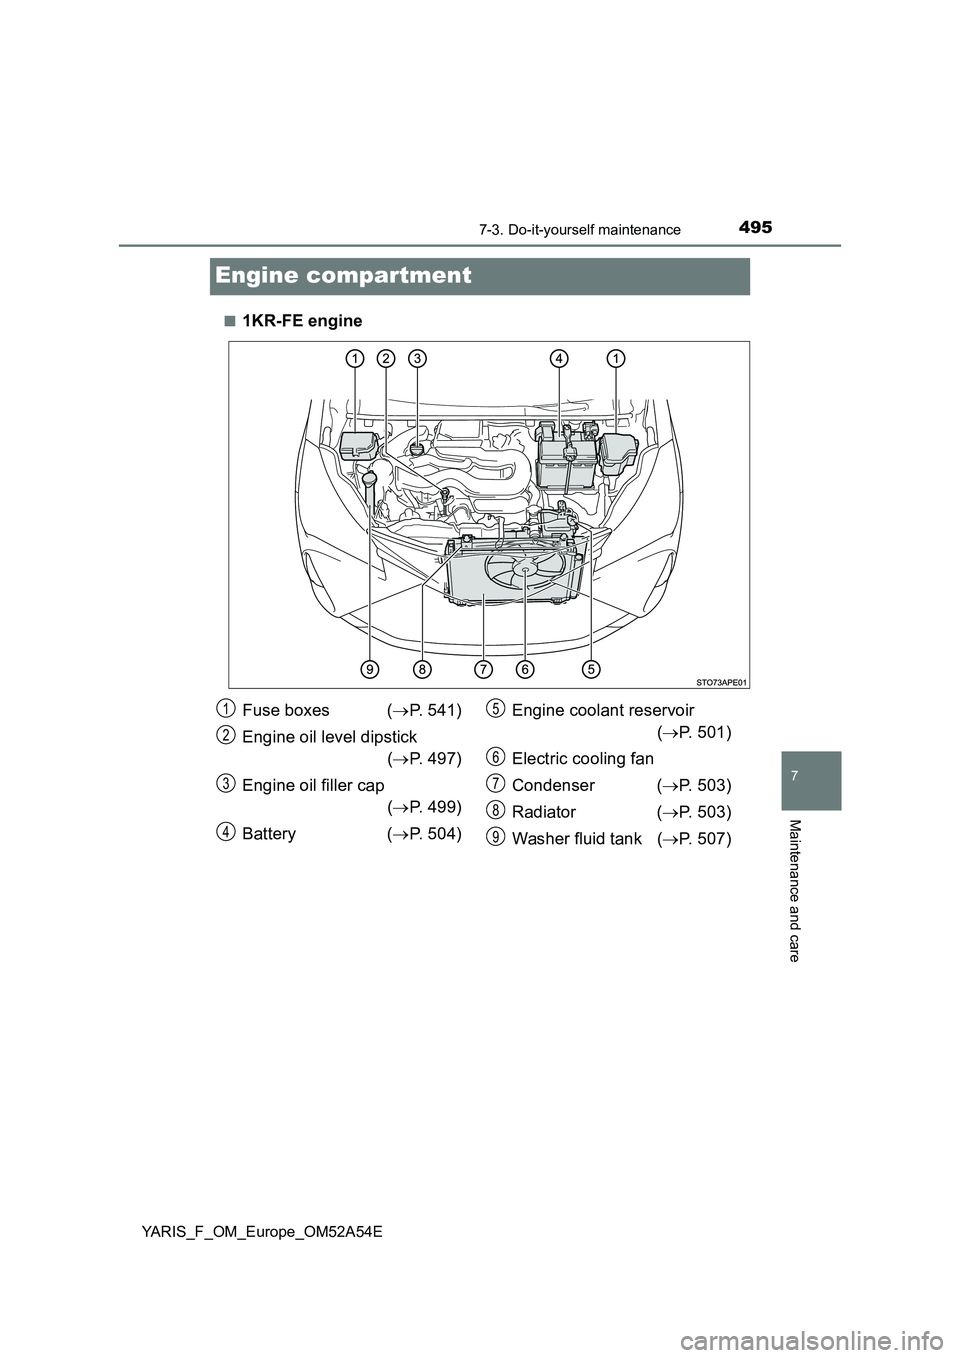 TOYOTA YARIS 2020  Owners Manual 4957-3. Do-it-yourself maintenance
7
Maintenance and care
YARIS_F_OM_Europe_OM52A54E
Engine compartment
■1KR-FE engine
Fuse boxes  (P. 541)
Engine oil level dipstick
(P. 497)
Engine oil filler